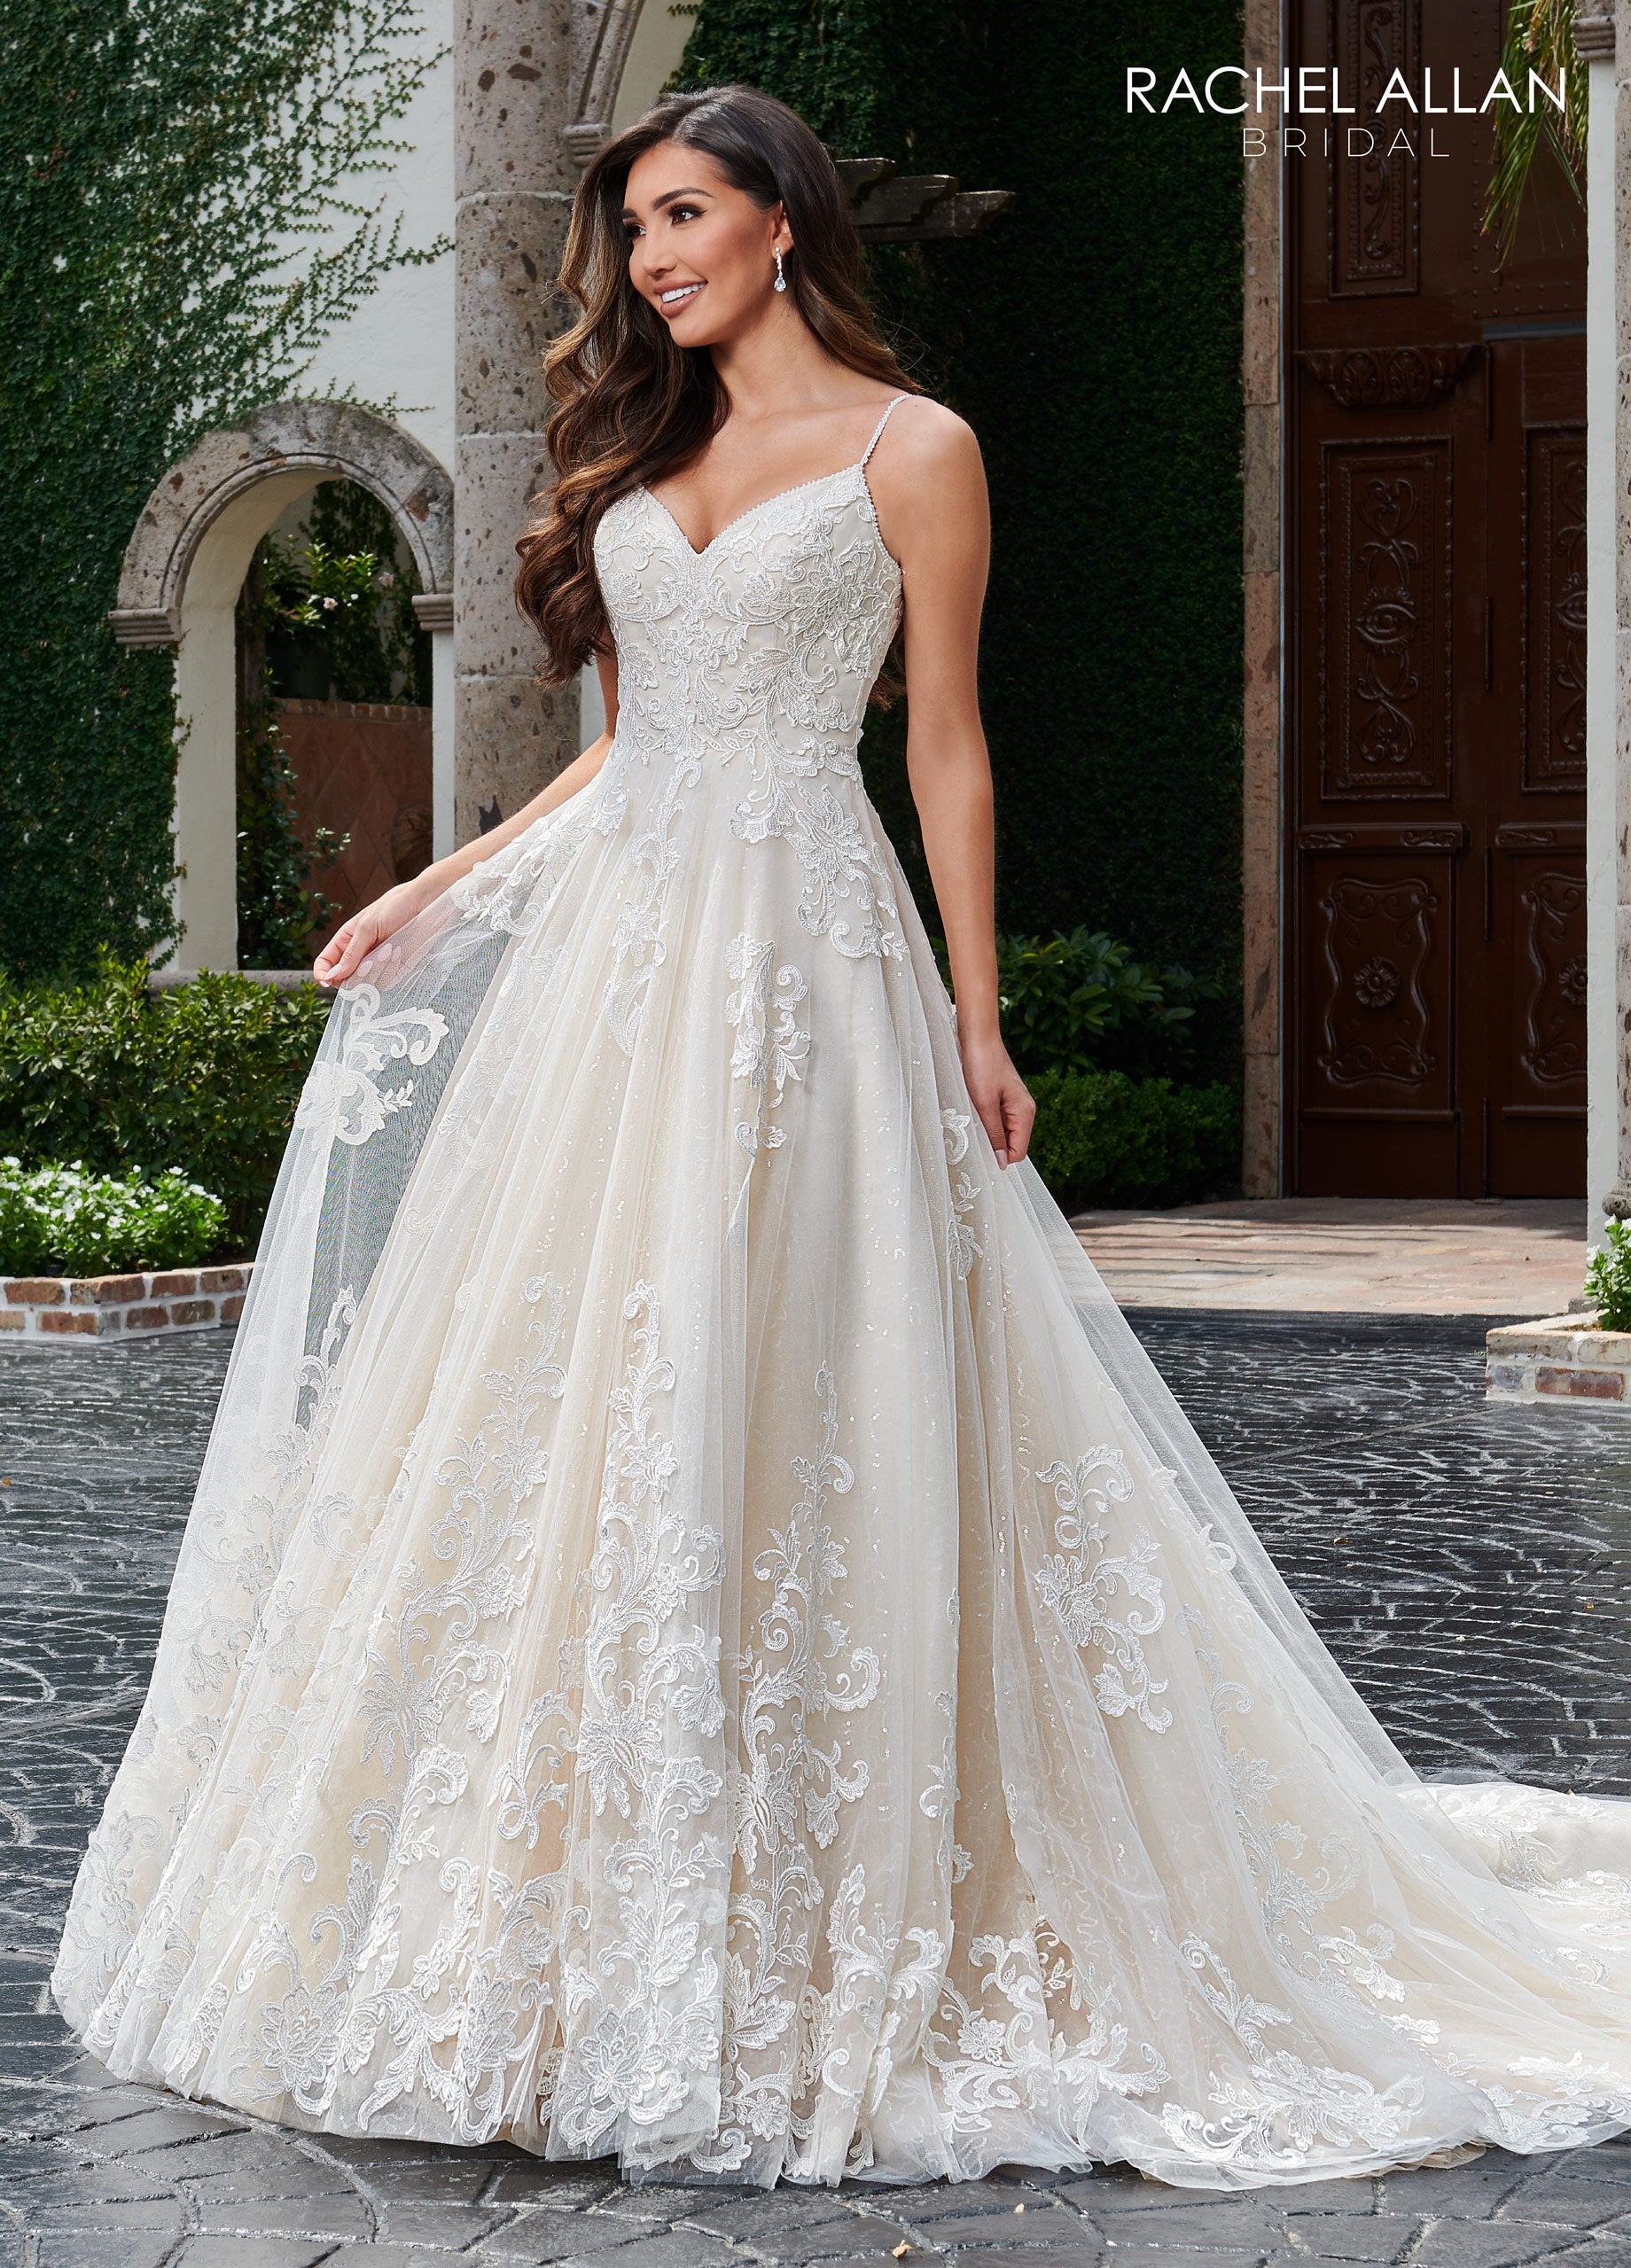 Heart A-line Couture D'amour In Ivory Champagne Color Rachel Allan